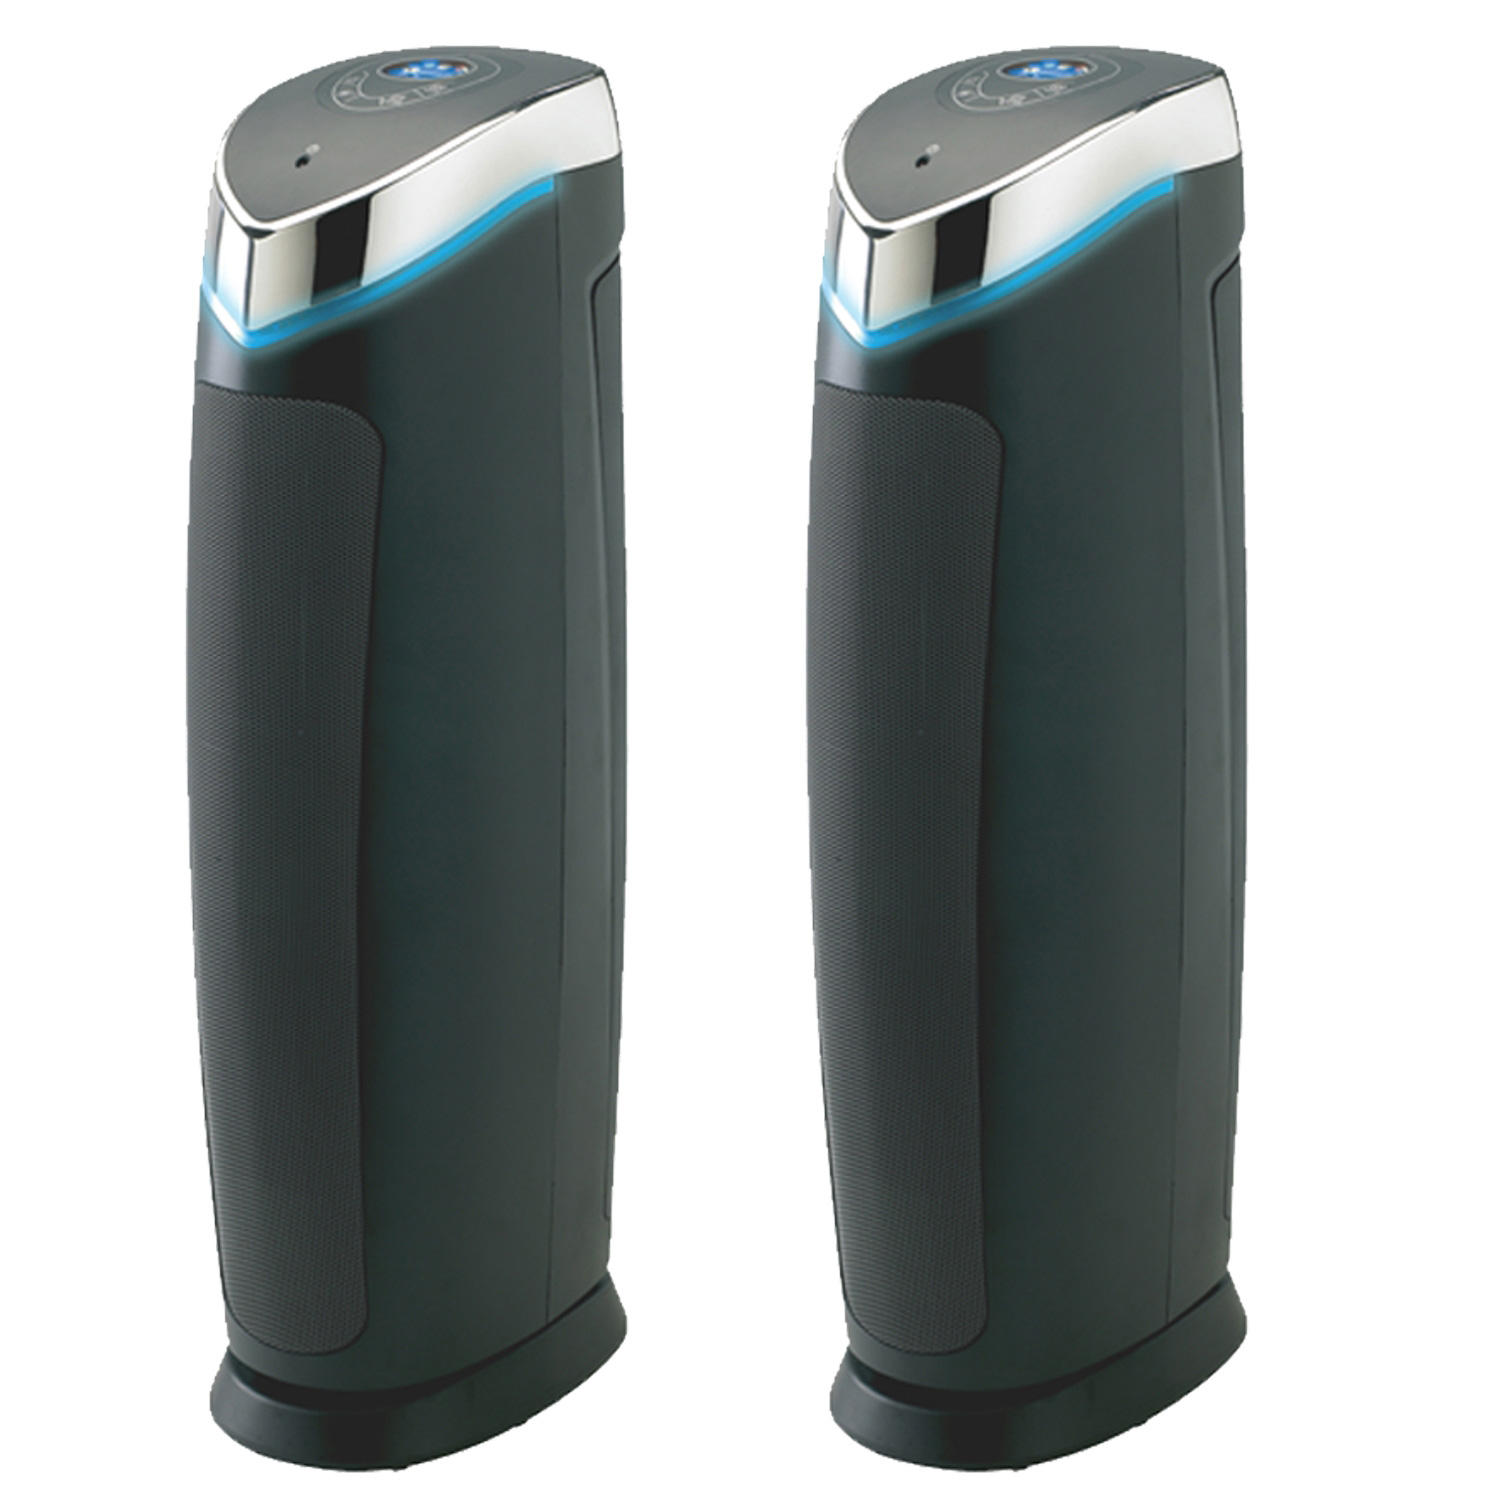 Digital 3 In 1 Air Cleaning System UV-C (2 Pack)